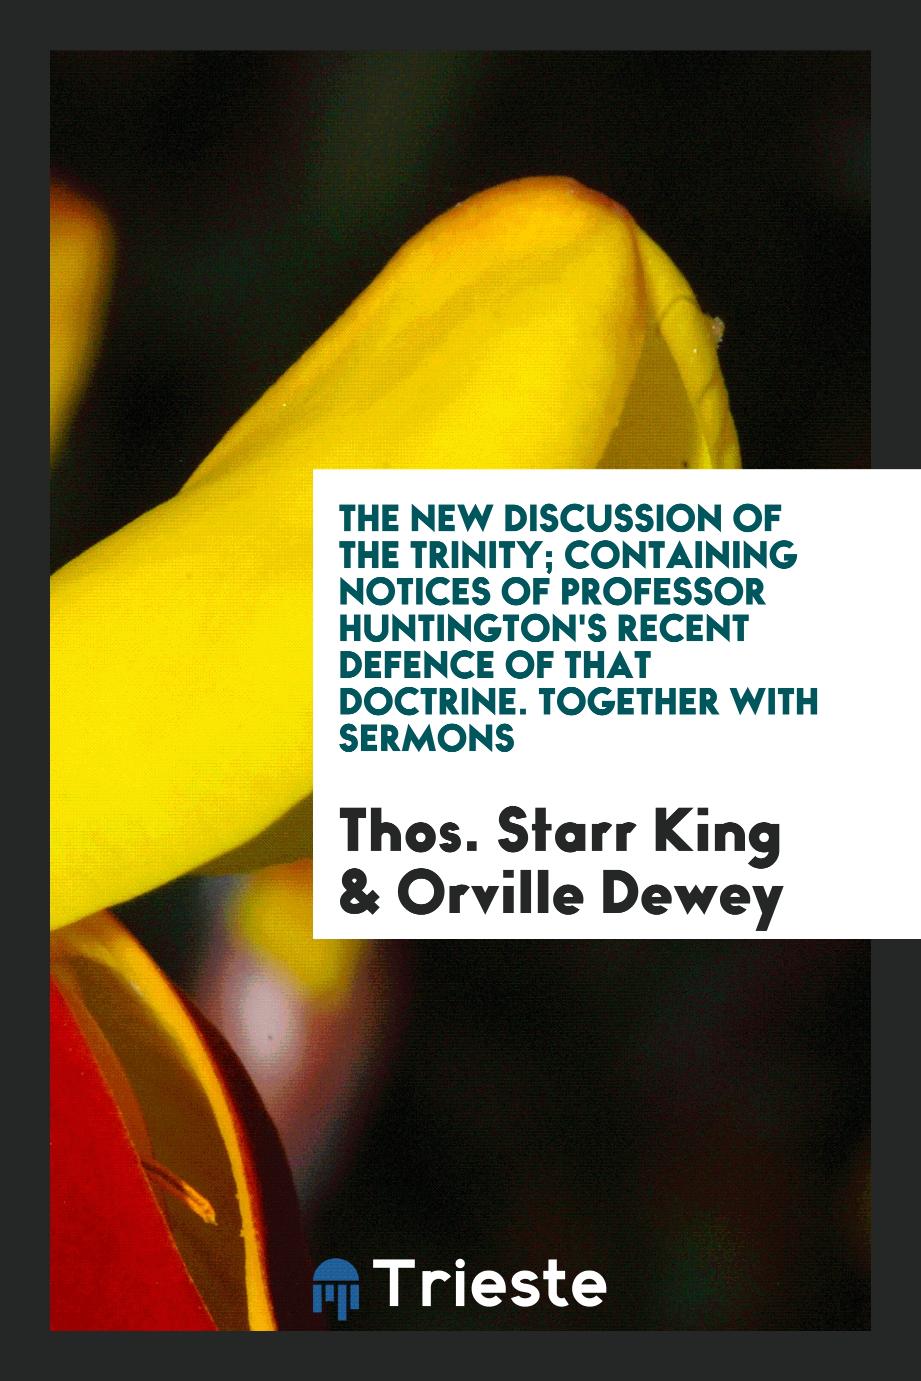 The new discussion of the Trinity; containing notices of Professor Huntington's recent defence of that doctrine. Together with sermons